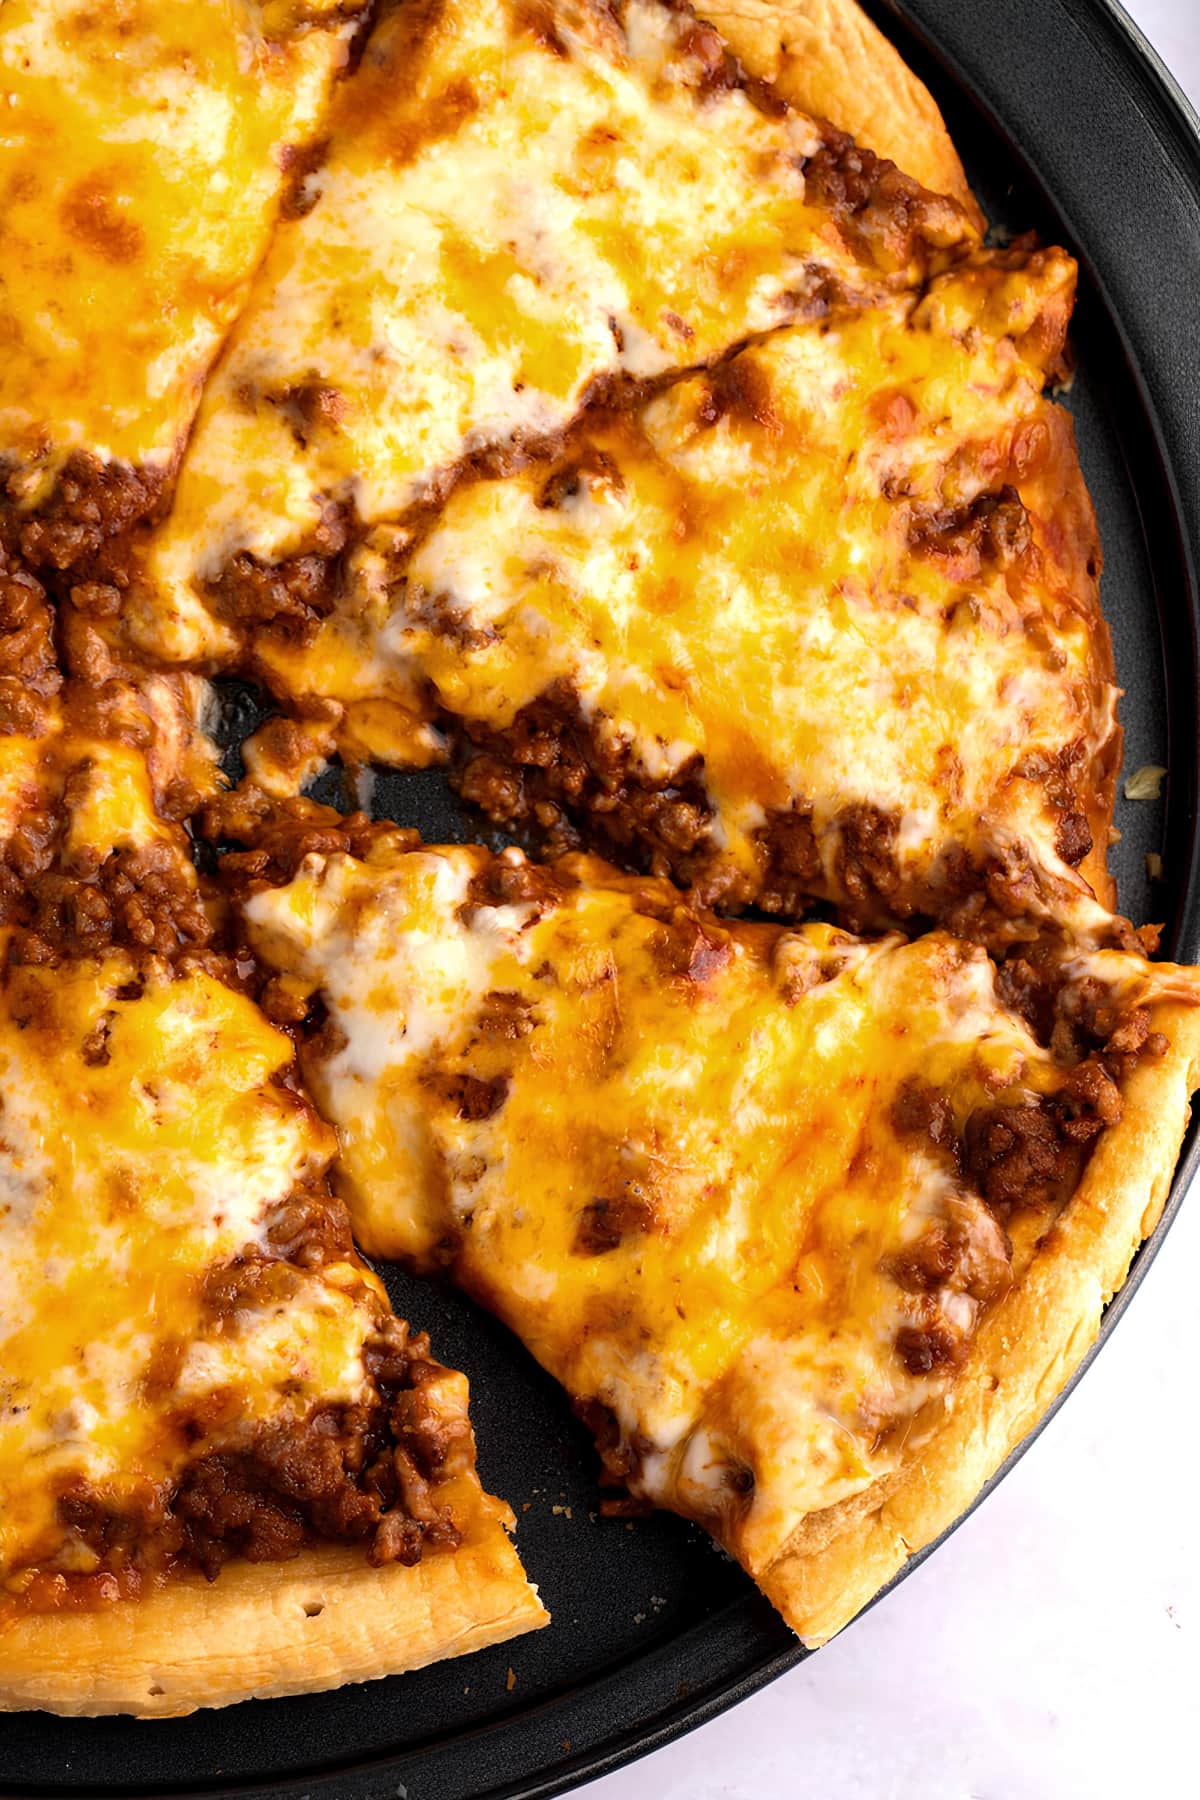 A Close Up of Sloppy Joe Pizza with Ground Beef and Cheese